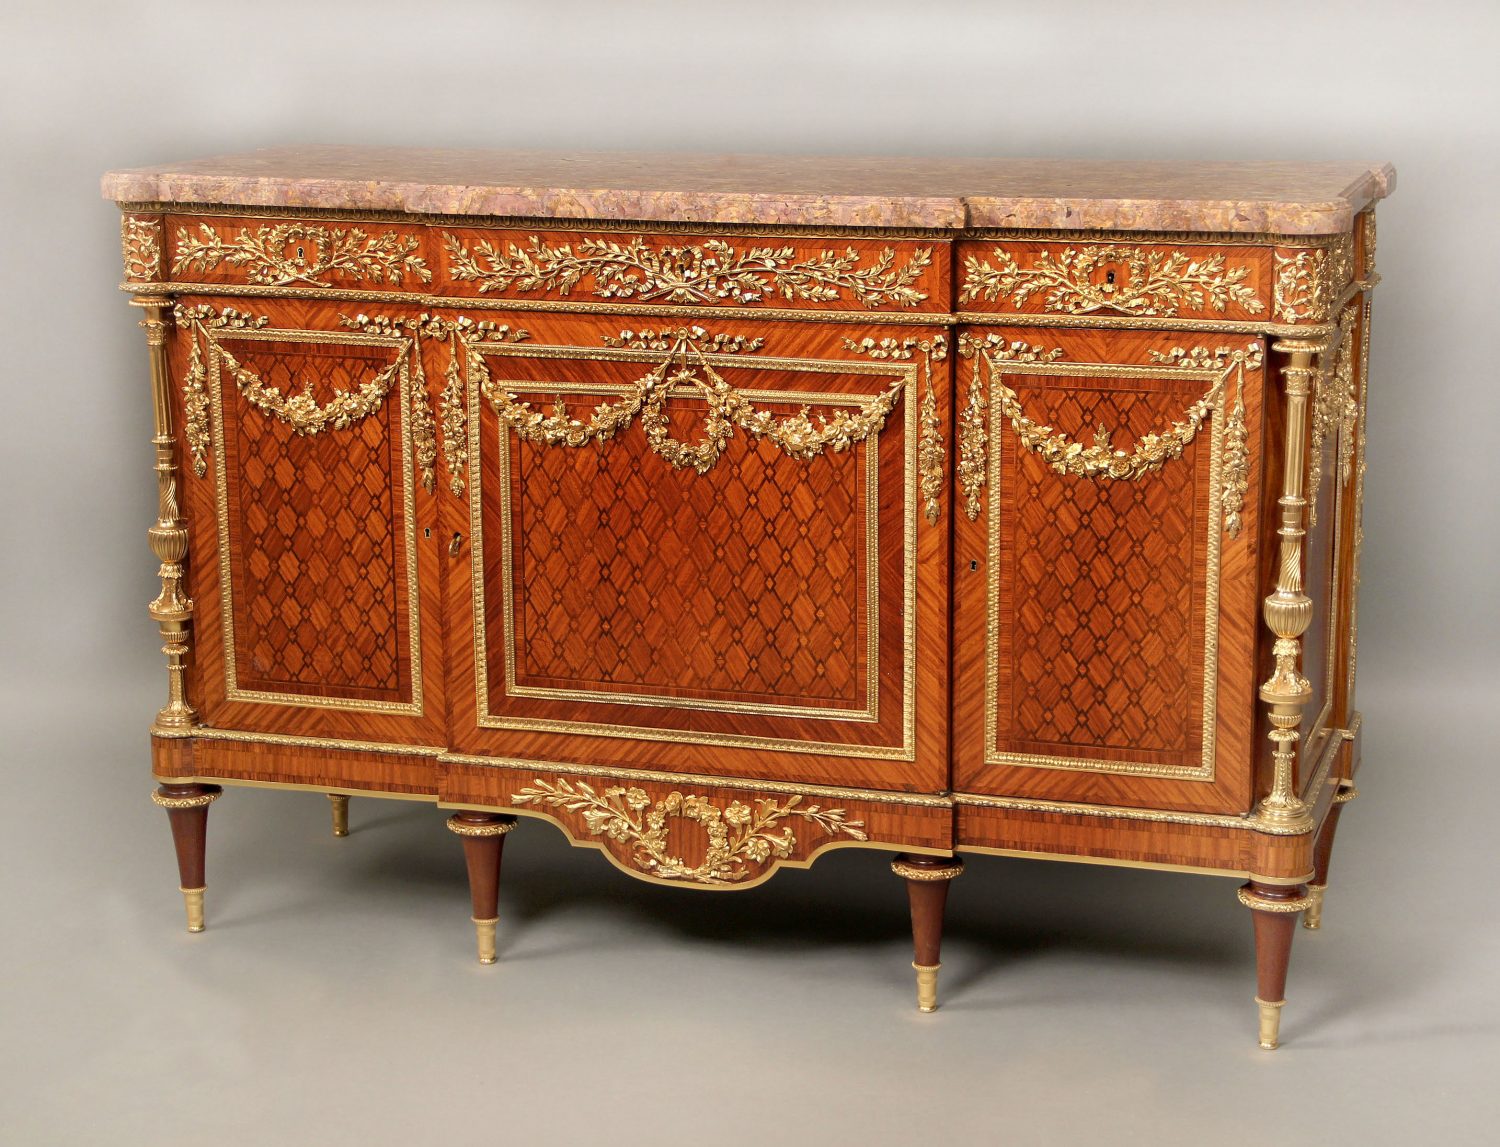 Late 19th Century Gilt Bronze Mounted Louis XVI Style Parquetry Commode By Zwiener Jansen Successeur